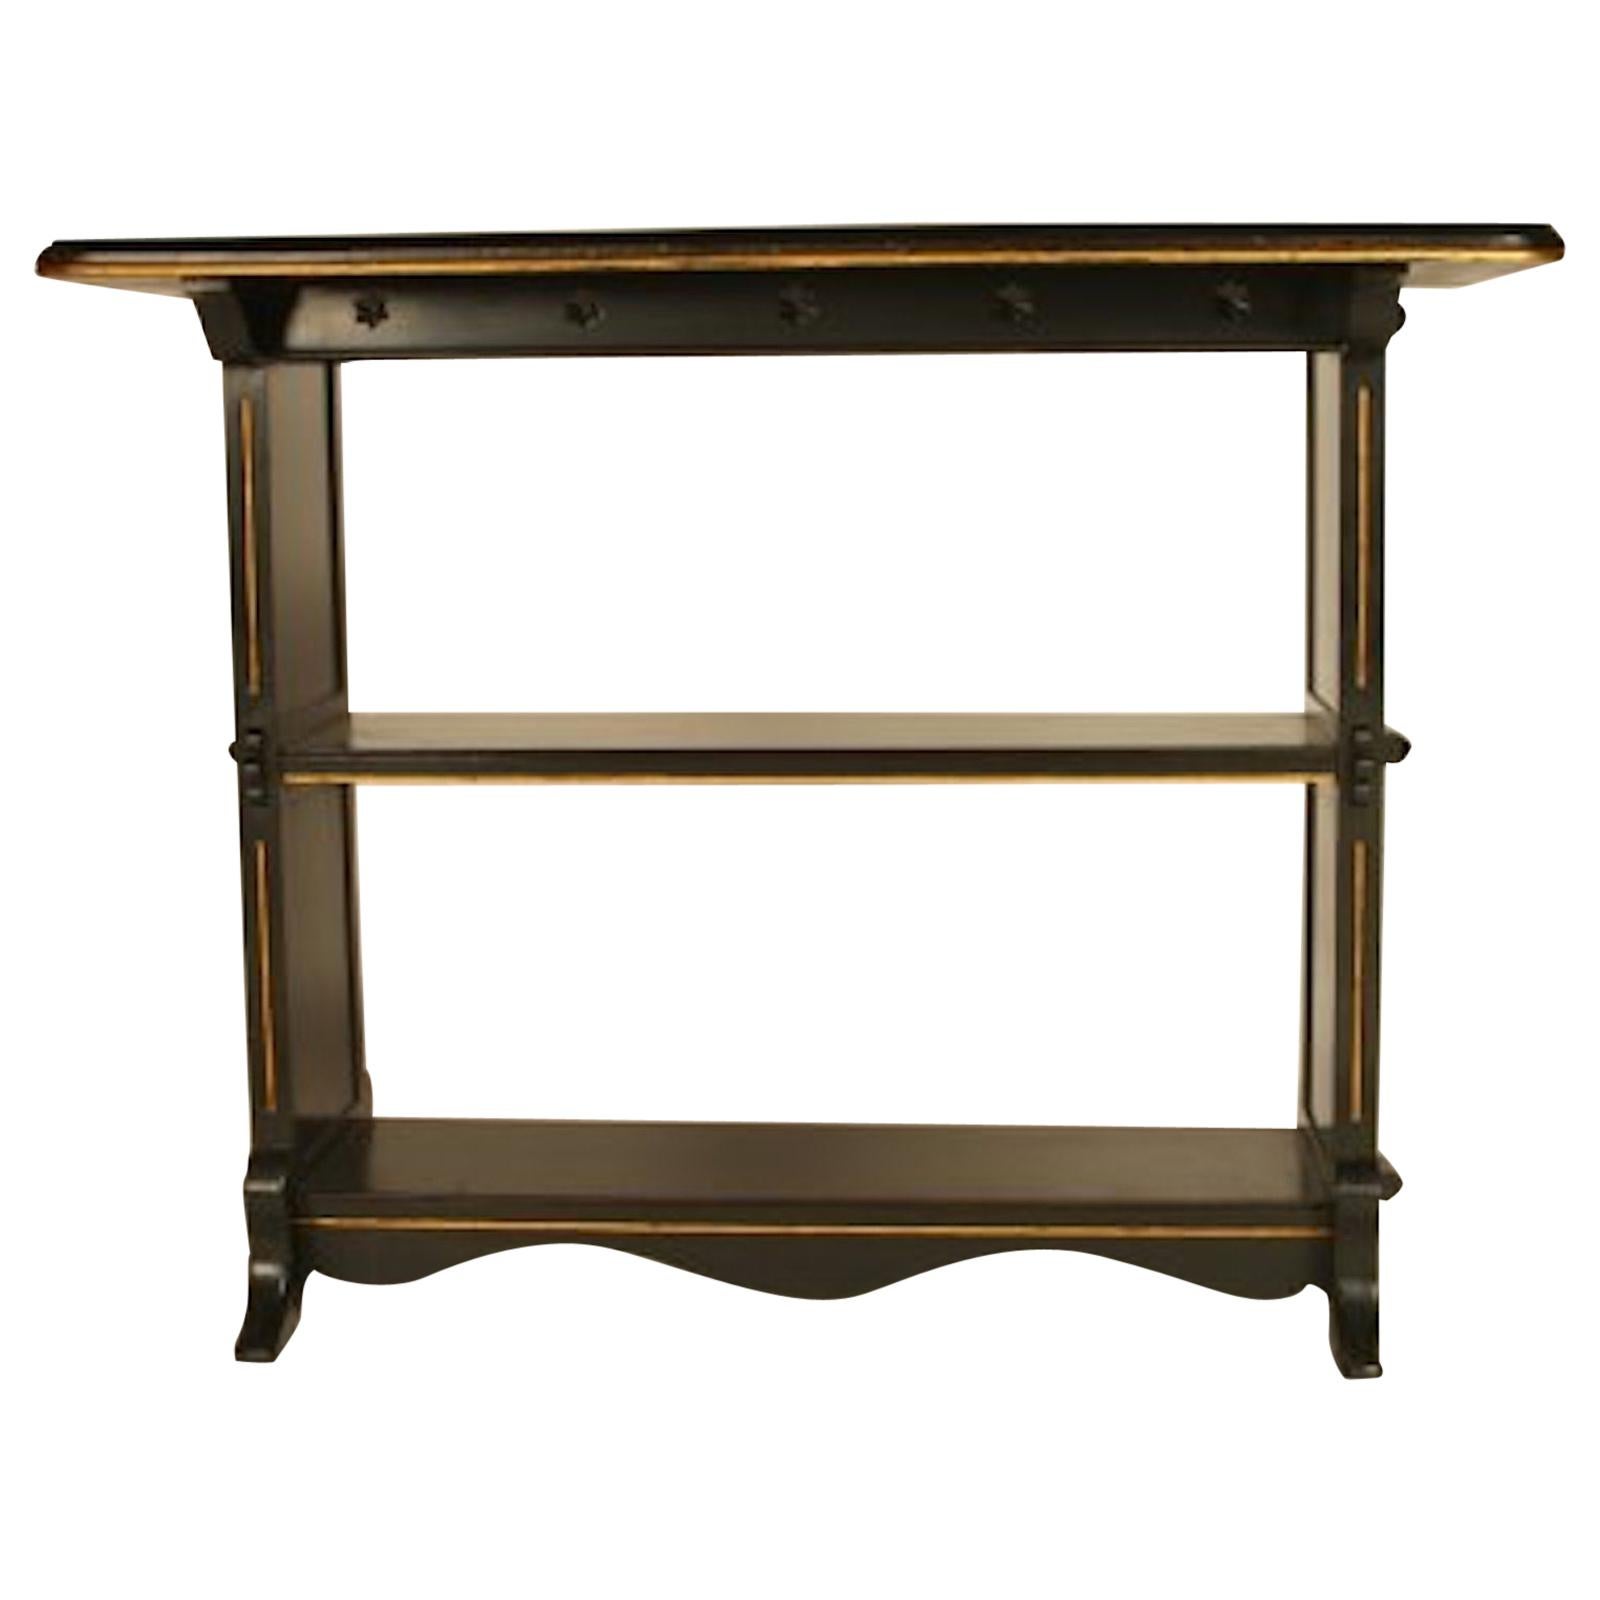 Dr C. Dresser, Style of, Aesthetic Movement Carved, Gilded & Ebonized Side Table